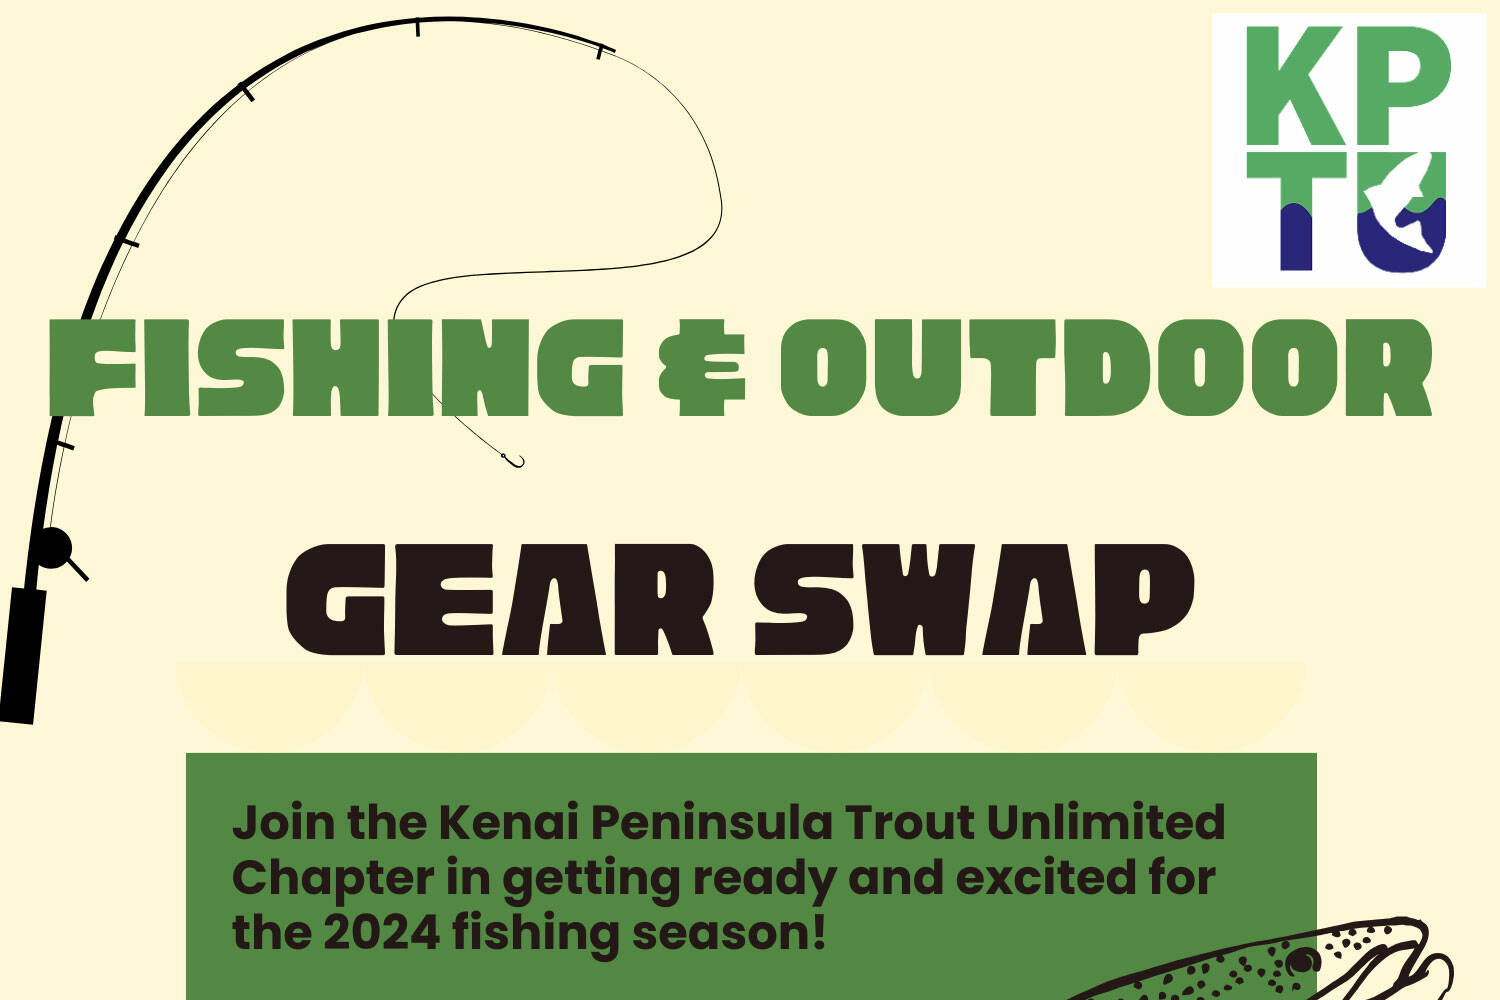 Poster for Kenai Peninsula Trout Unlimited Fishing Gear Swap. (Courtesy Kenai Peninsula Trout Unlimited)